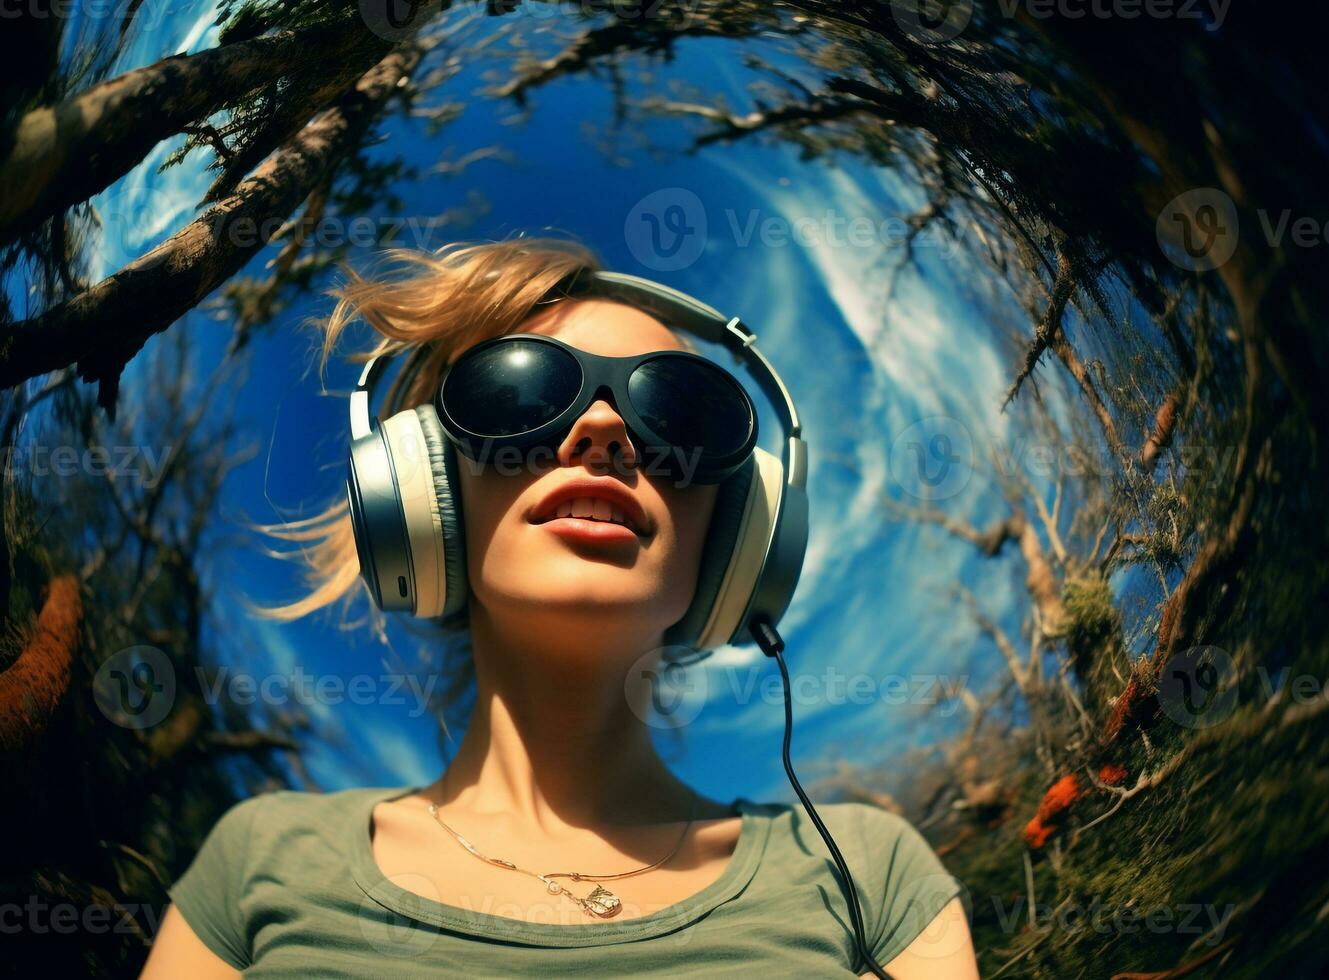 A woman listening to music in a fisheye lens, mental health images, illustration images for commercial use photo